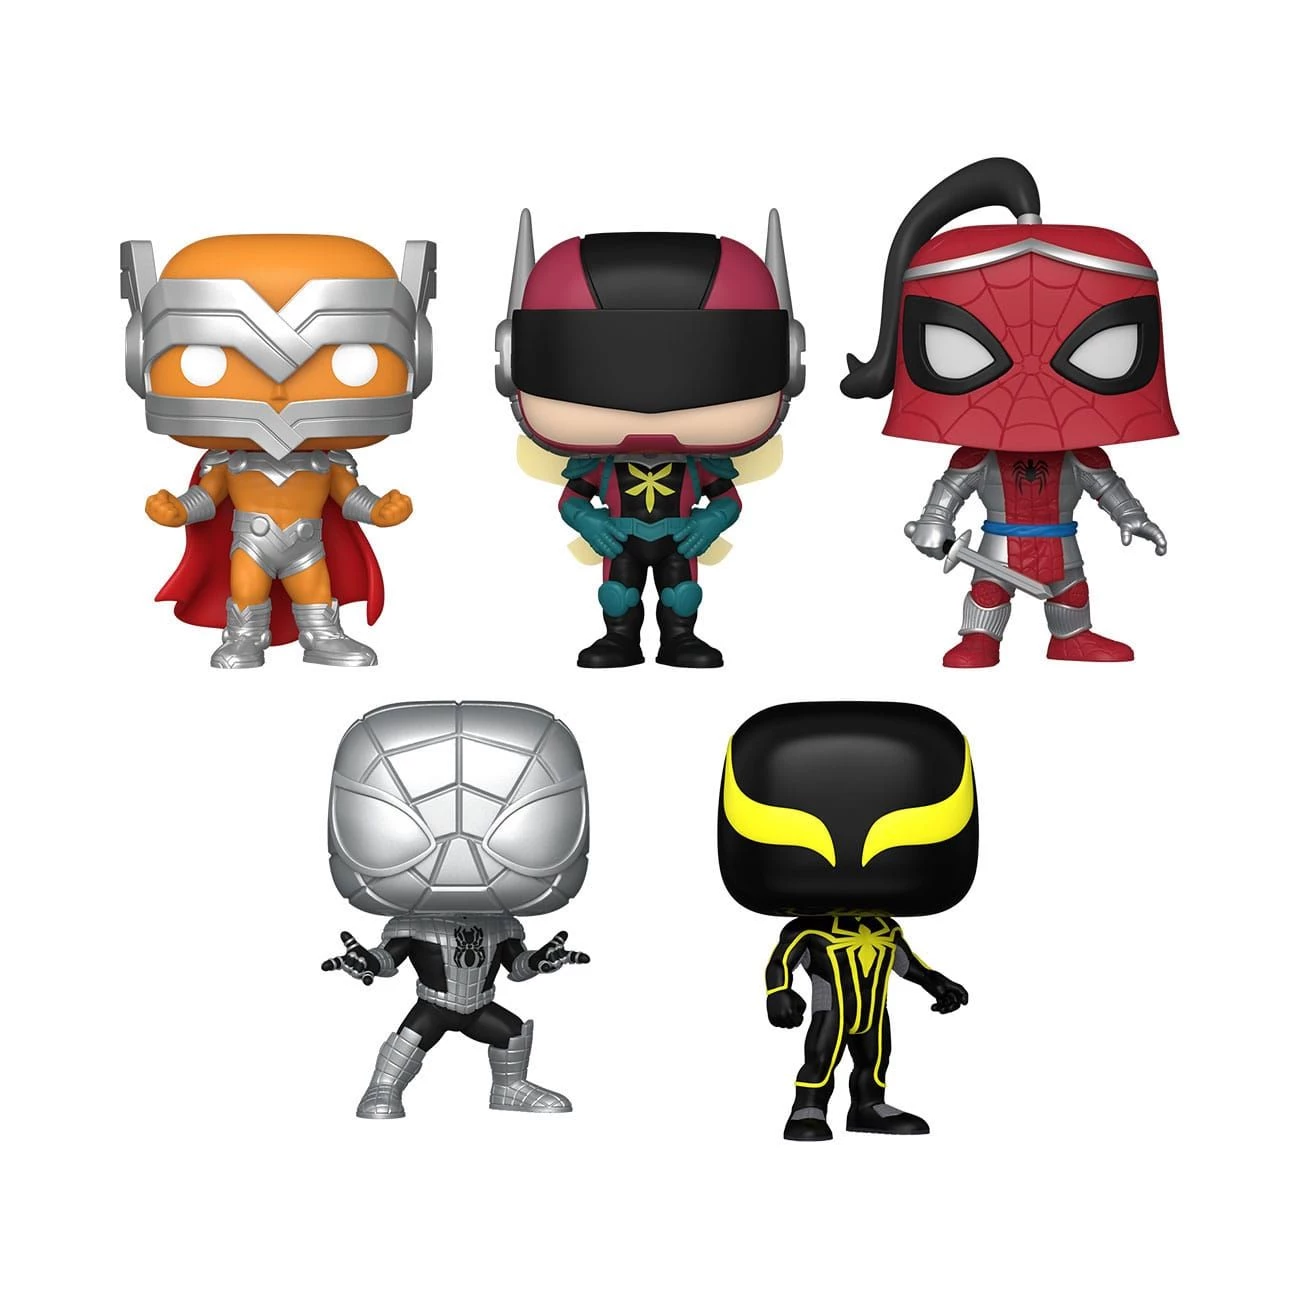 Marvel POP! Vinyl Figure 5-Pack Year of the Spider Special Edition 9 cm Funko